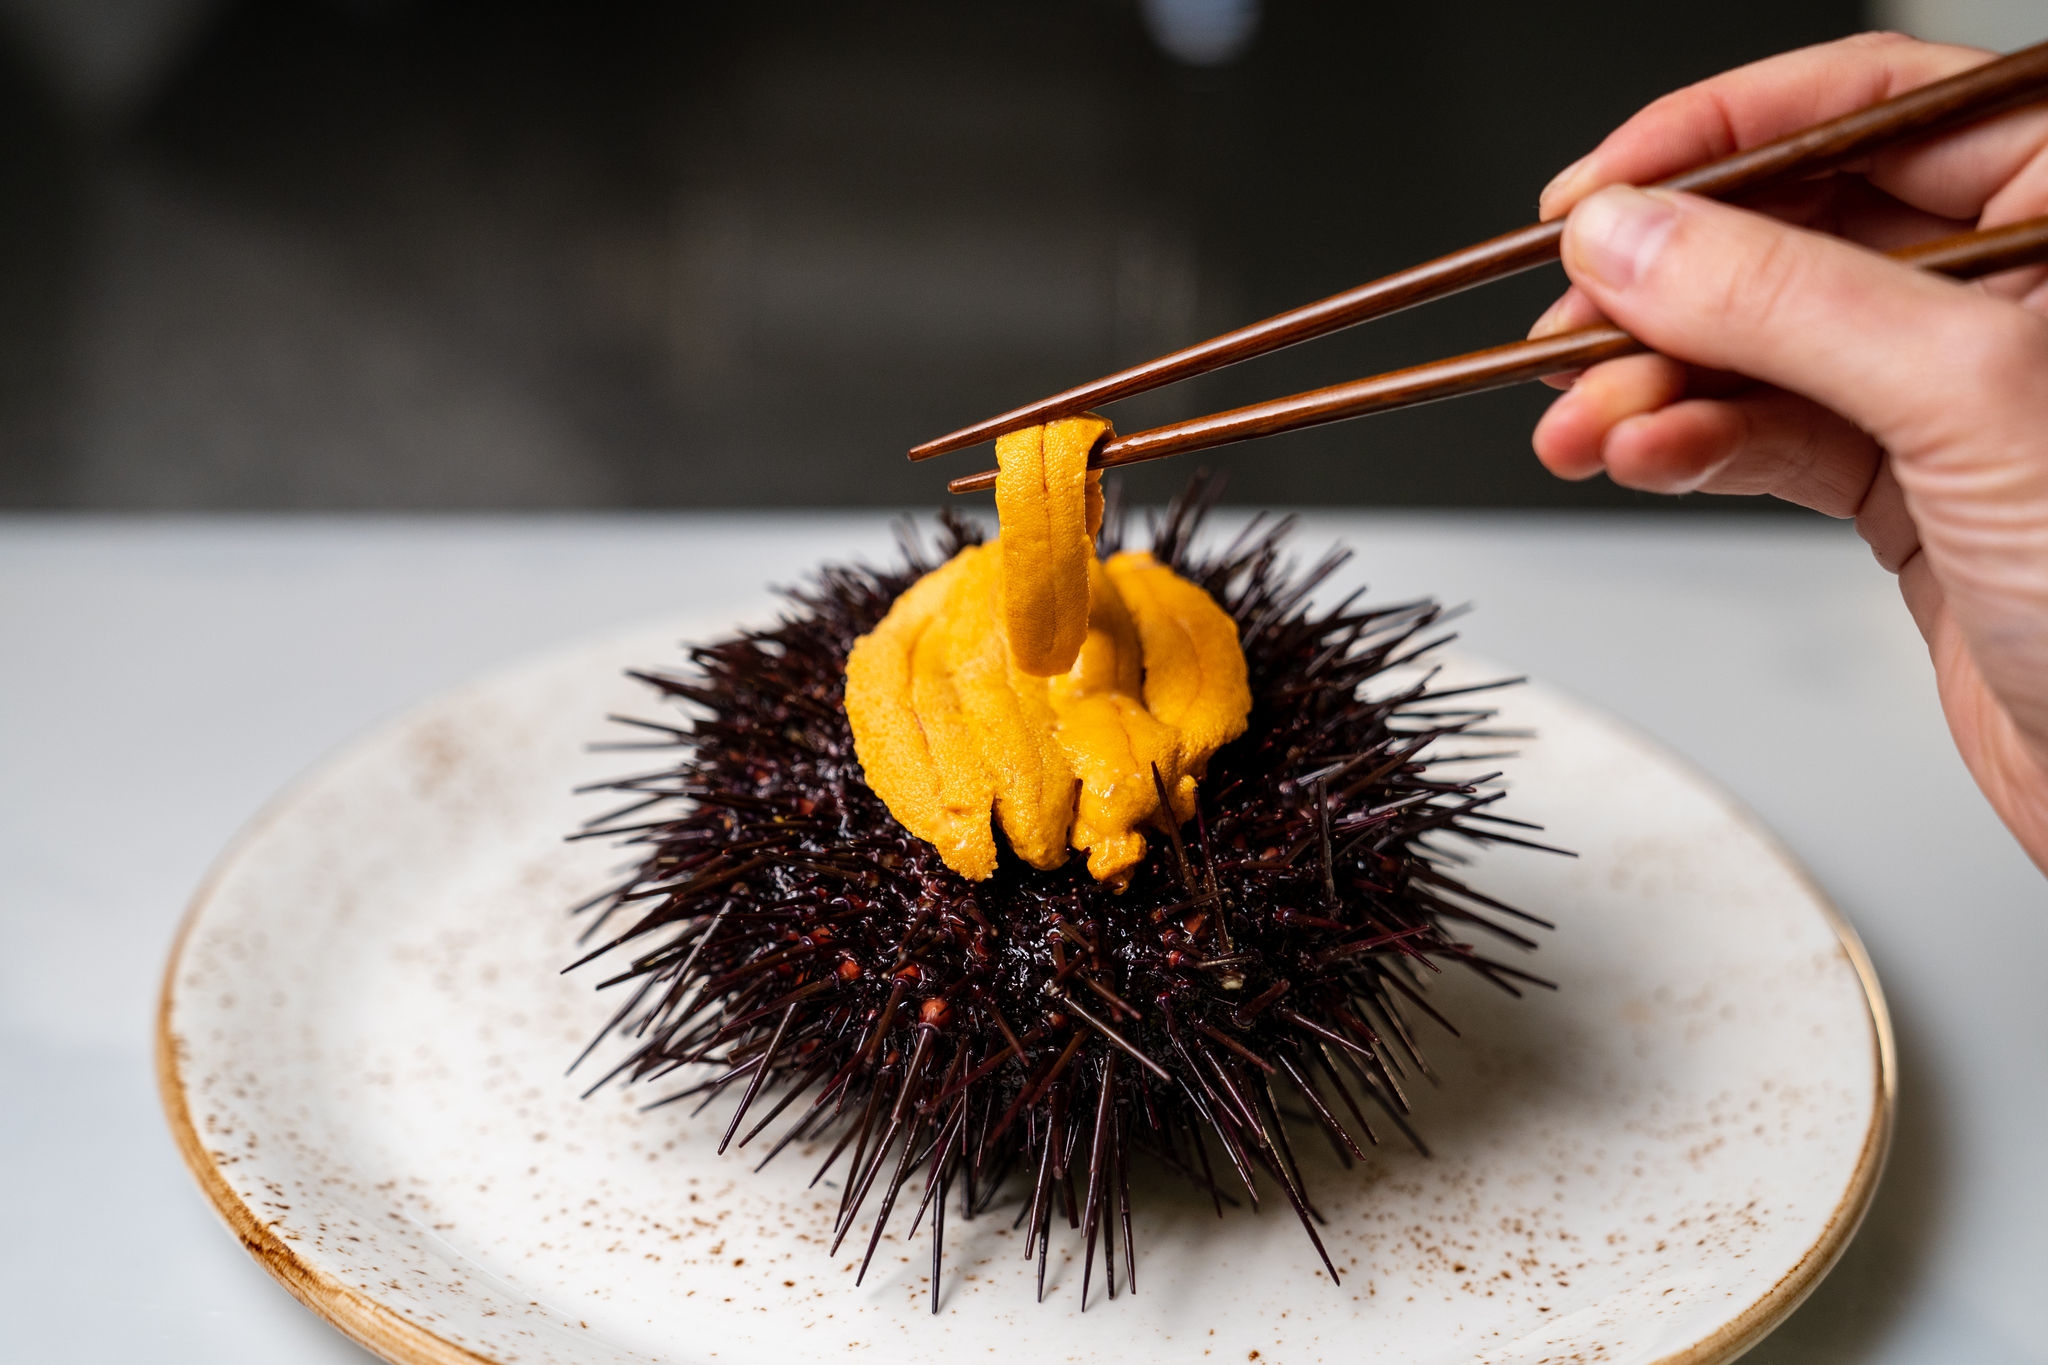 sea-urchin-plated-to-eat